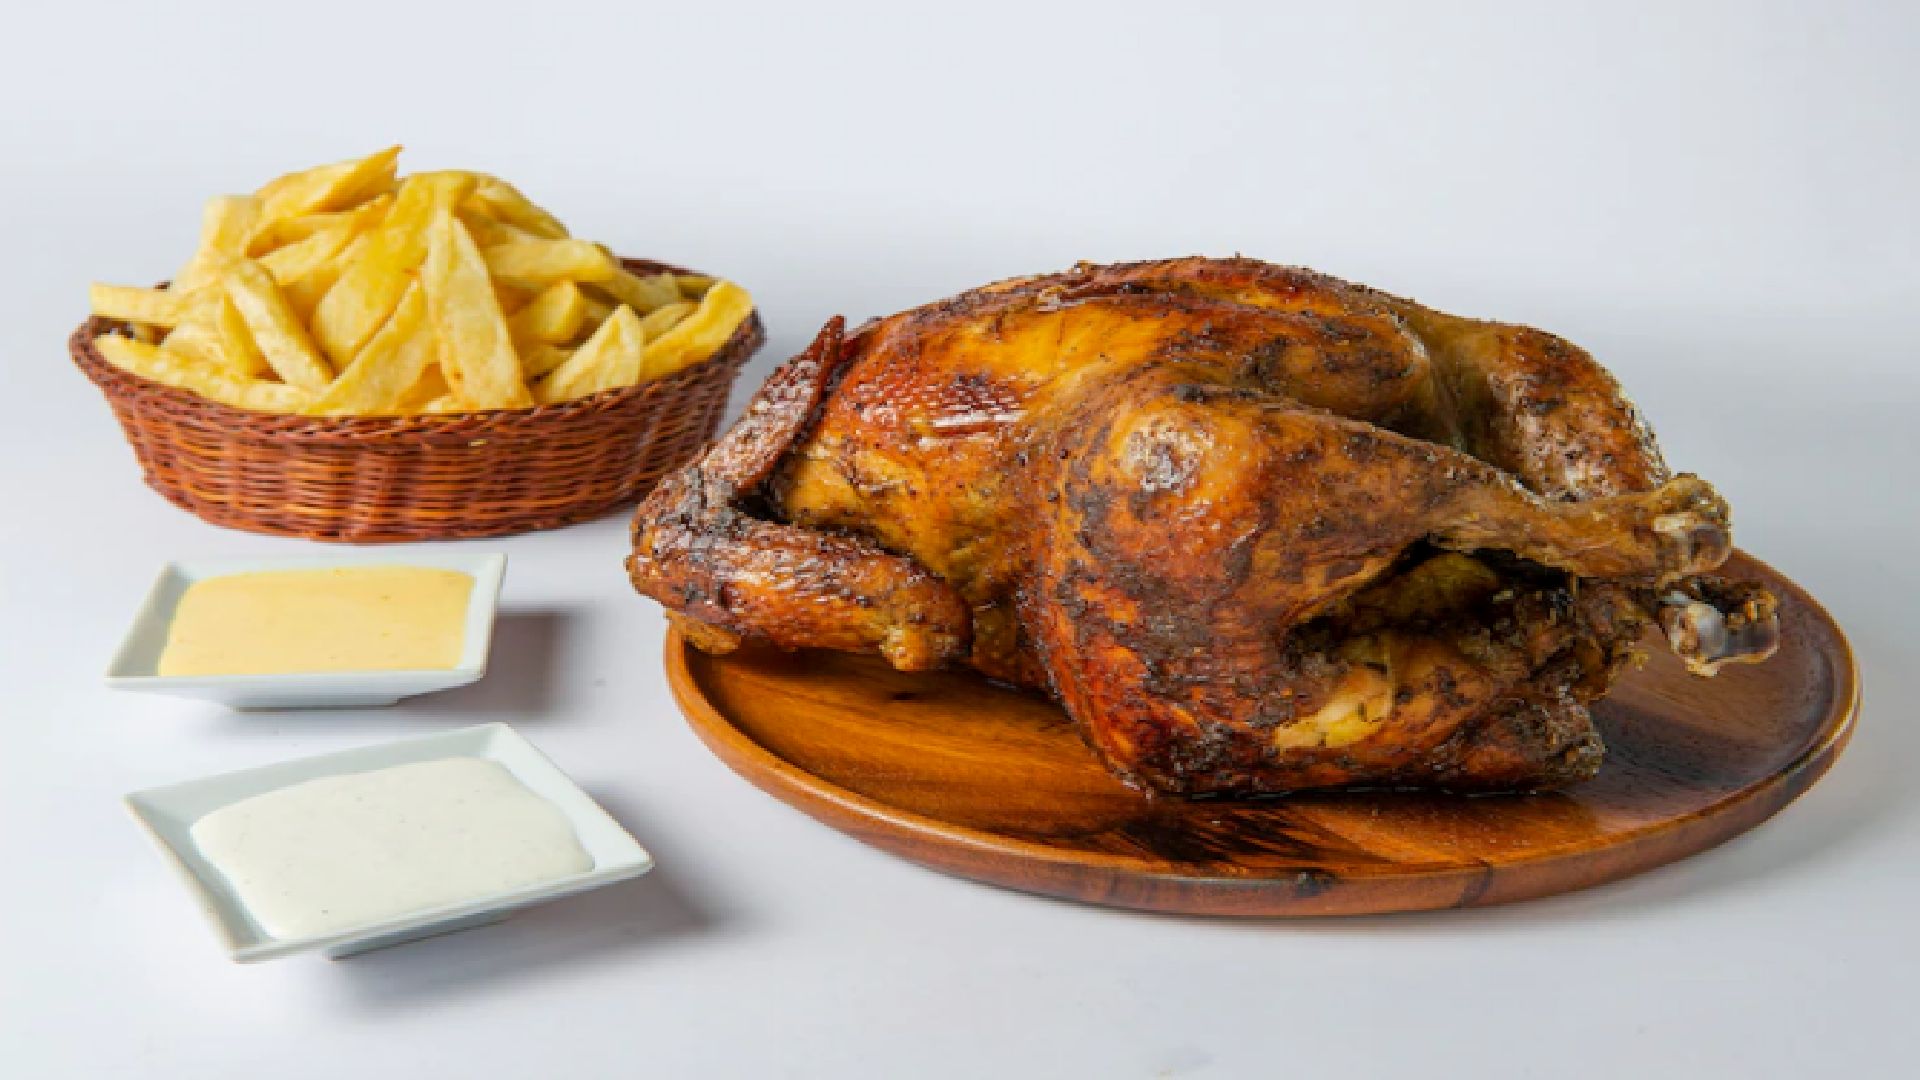 Grilled chicken is another traditional Peruvian dish that was among the best in the world. (Freepik)